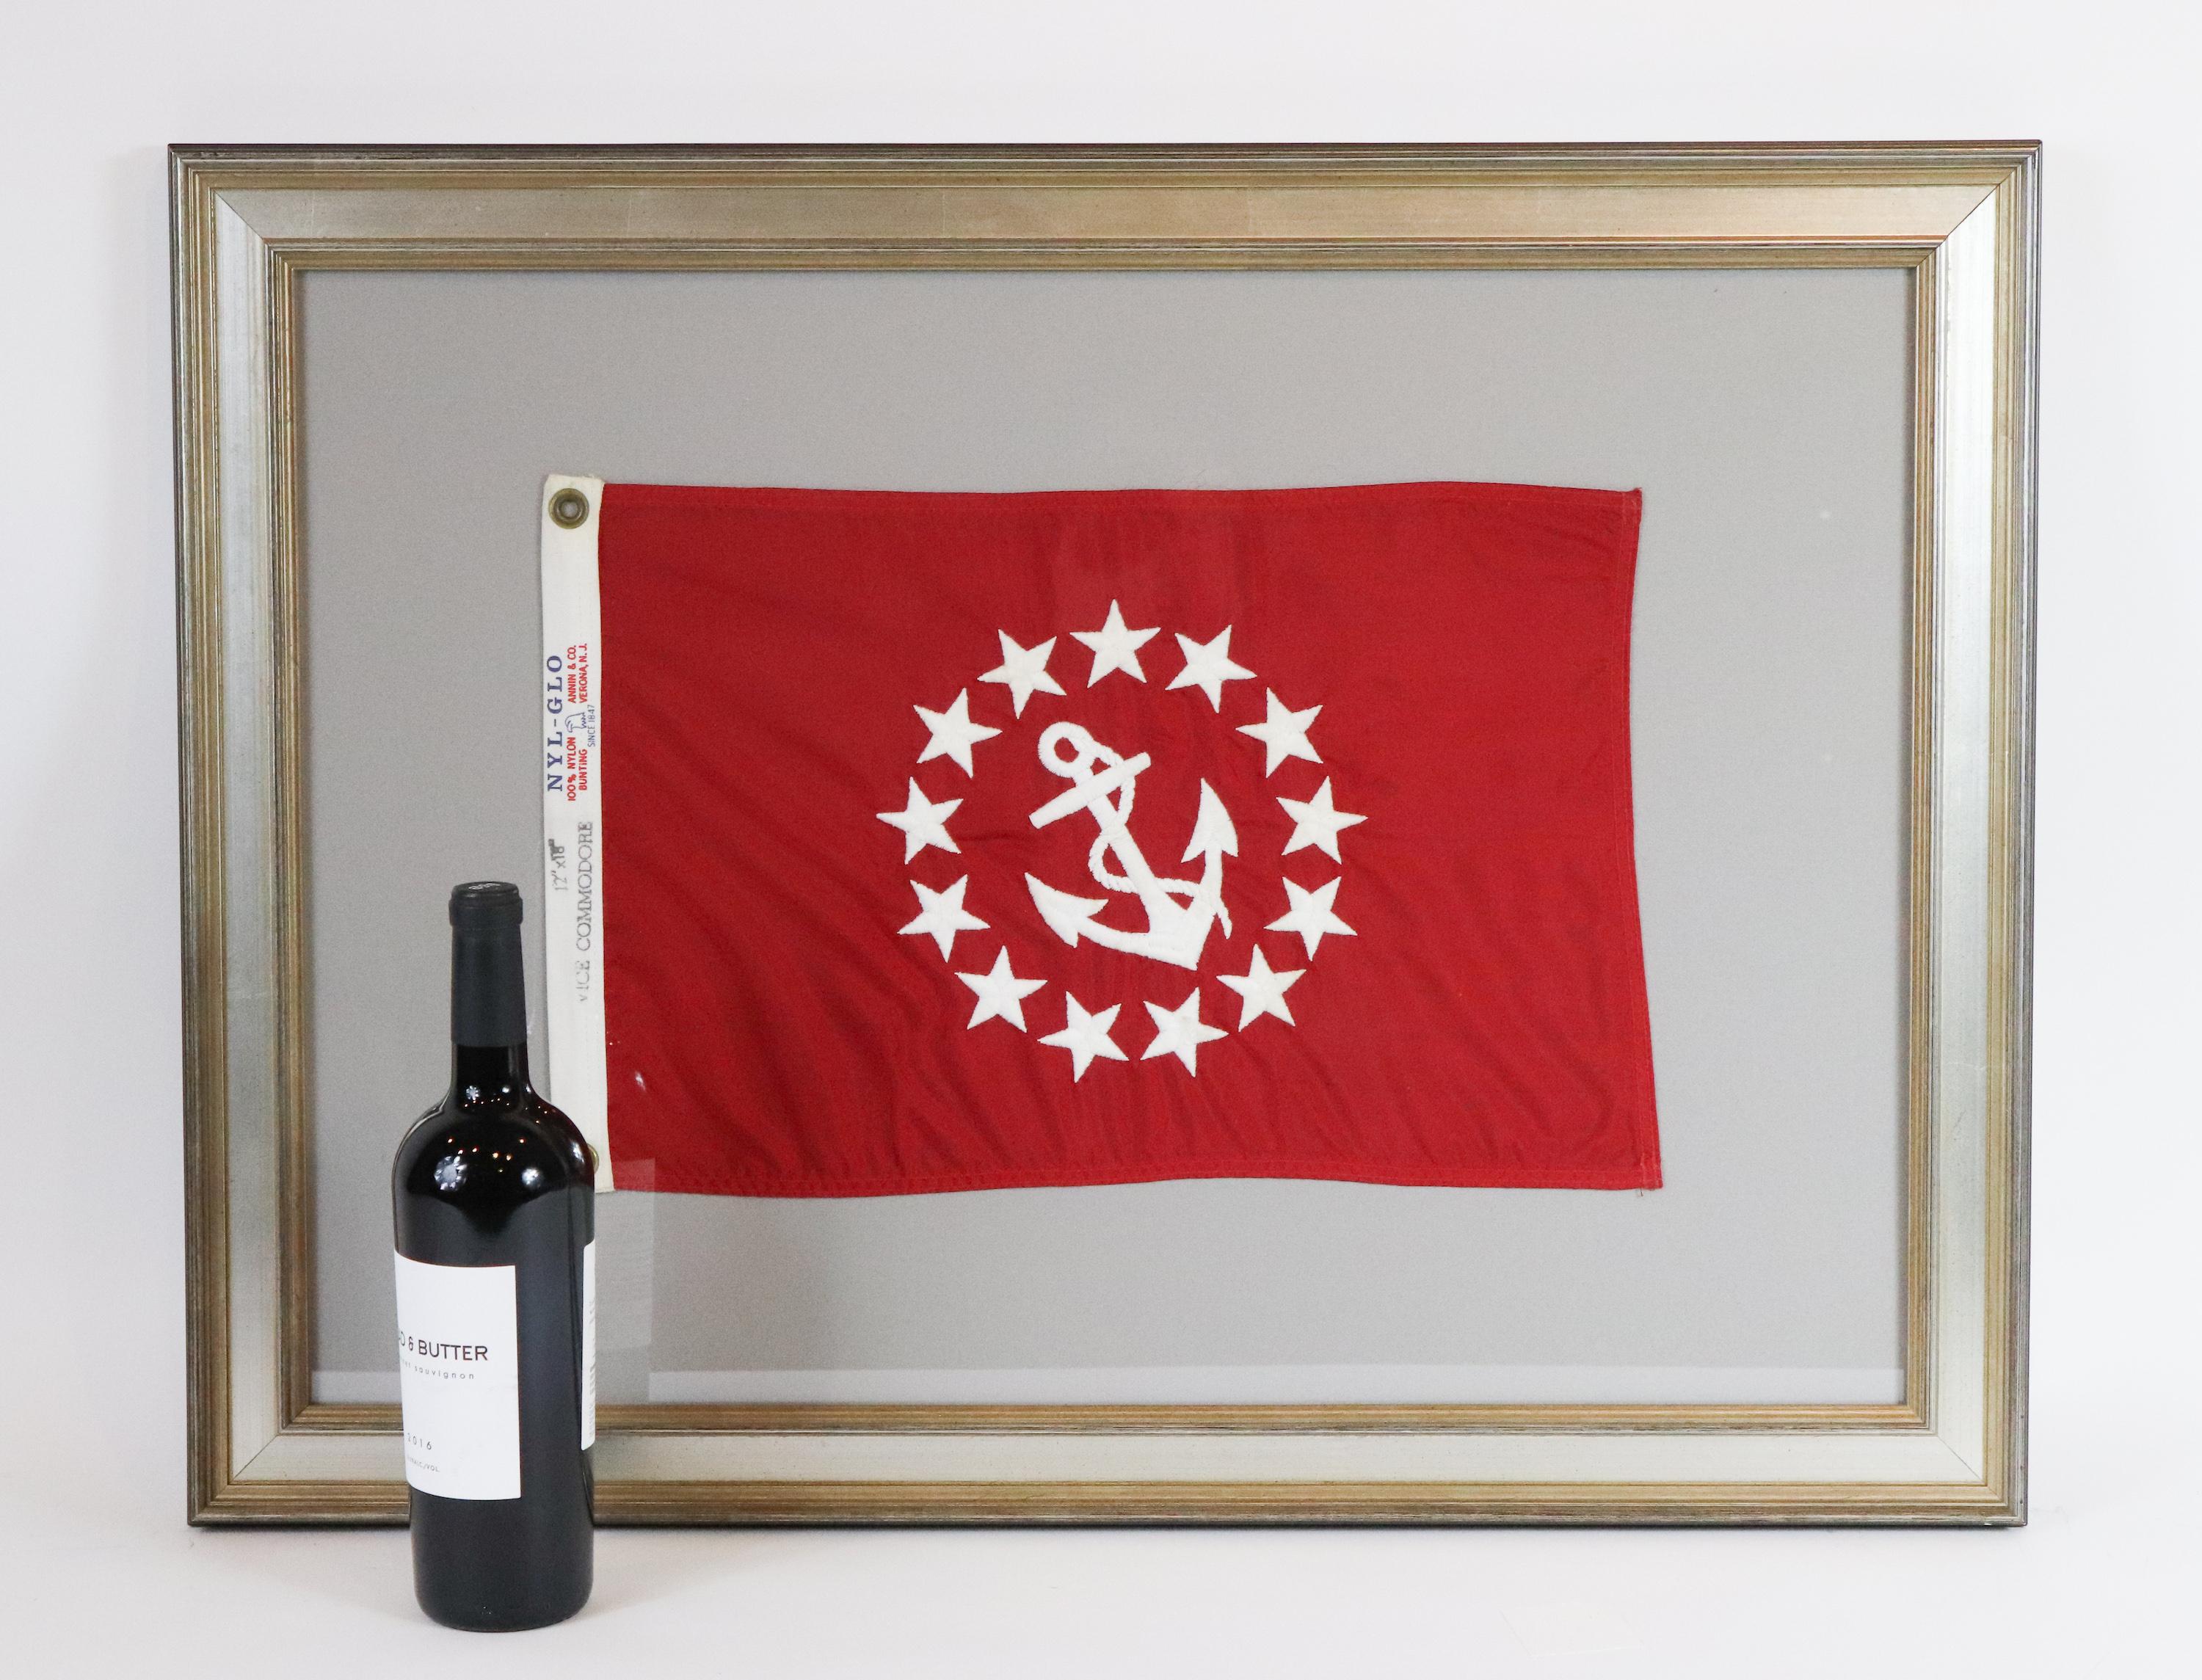 Framed Vice Commodore flag showing a red field with a white embroidered fouled anchor surrounded by a ring of stars. Nicely framed with gray mat. Measures: 32